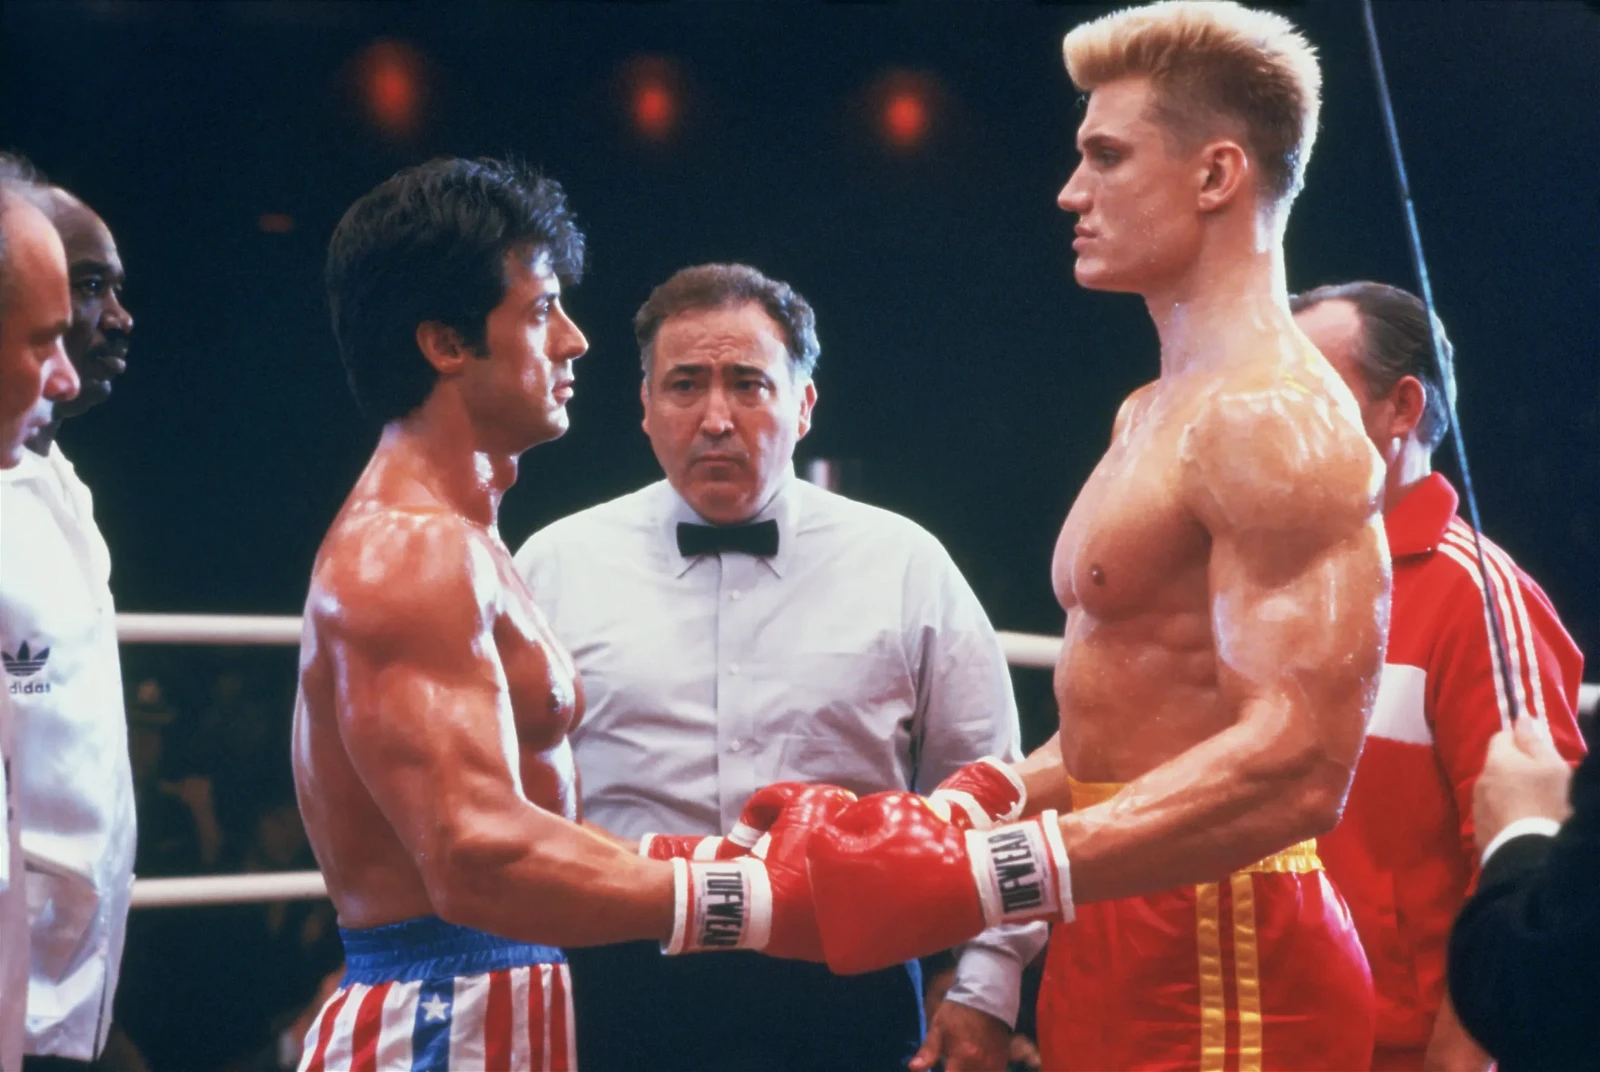 Sylvester Stallone and Dolph Lundgren from the movie Rocky